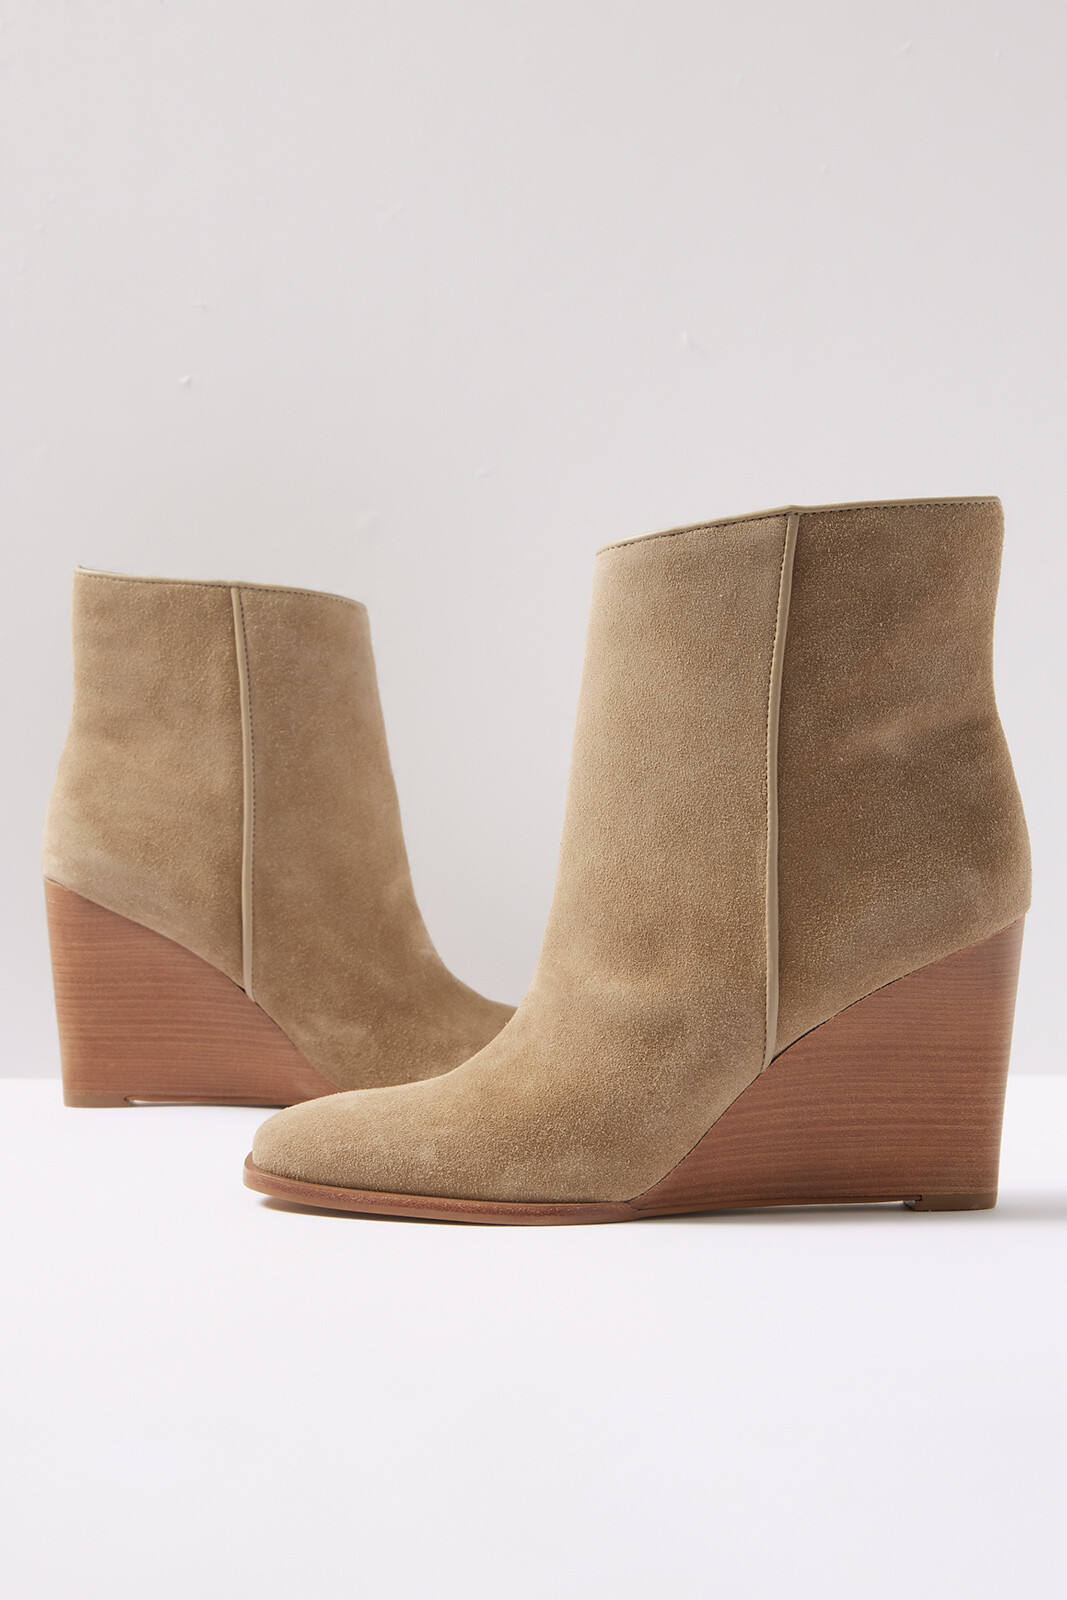 Dolce Vita Susann Suede Square Toe Wedge Booties - 6M